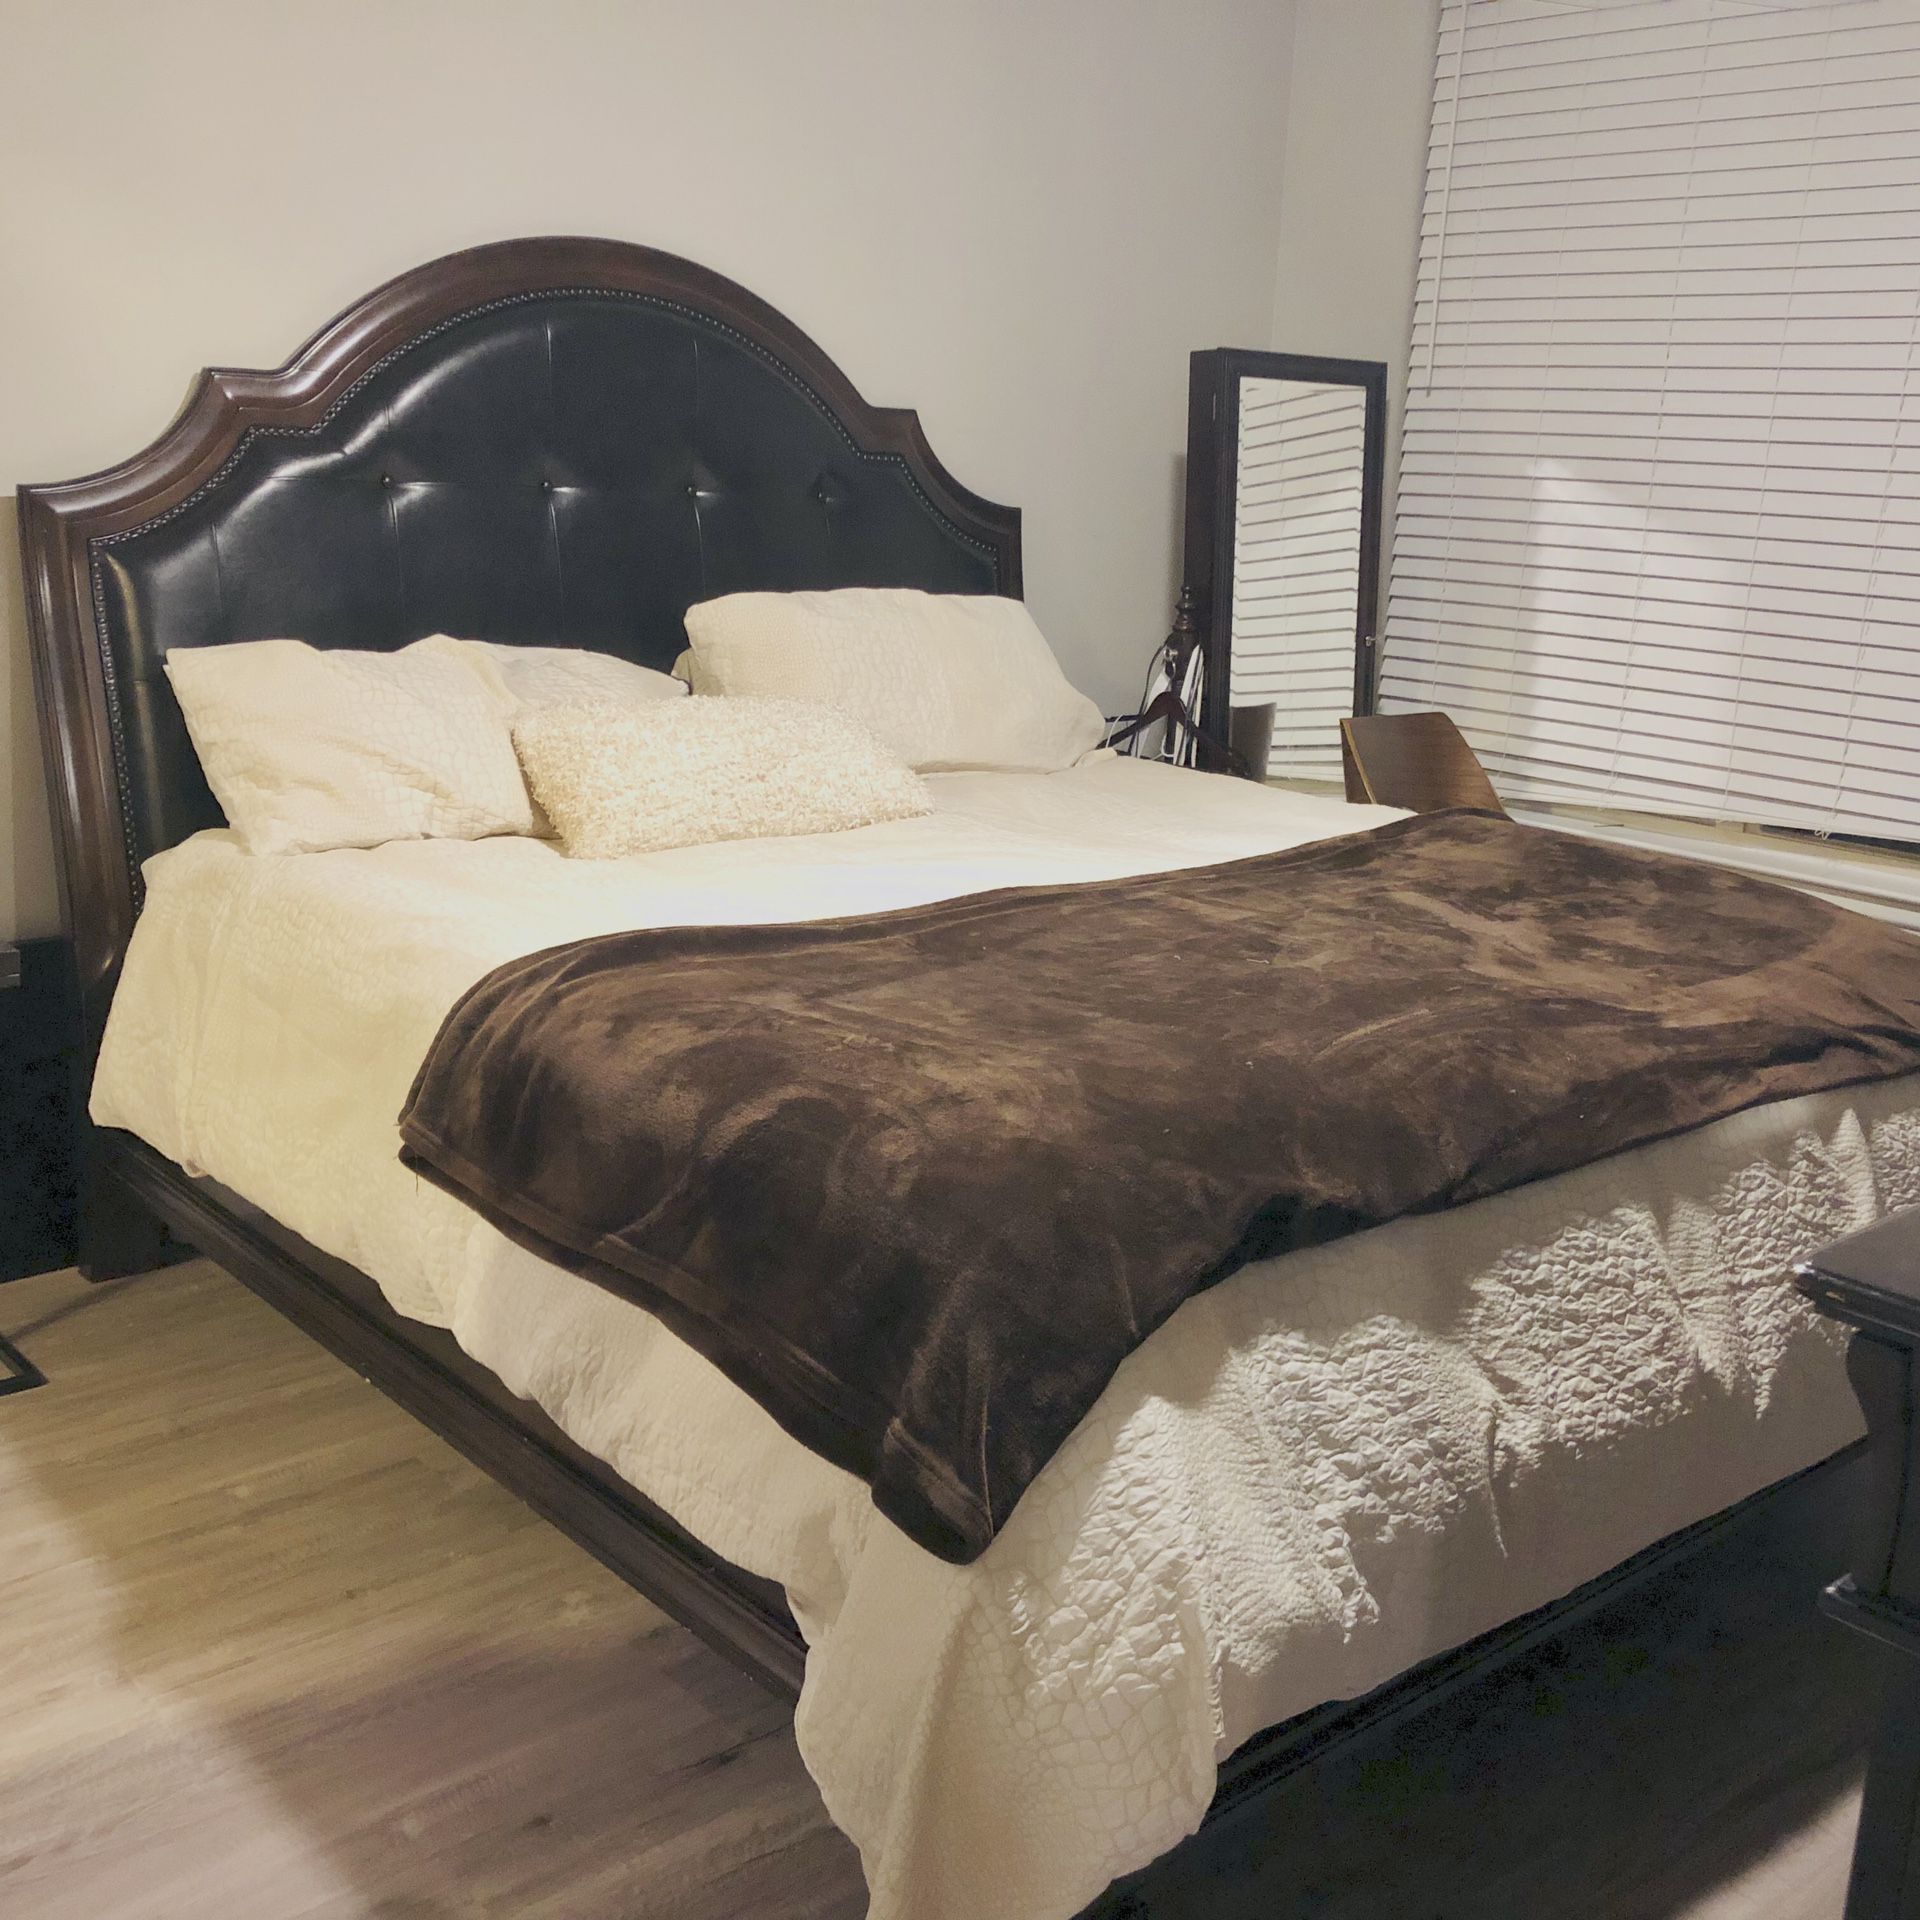 Must go! Deal of a life time! Moving to Boston! Relocation sell of Complete King size bedroom set